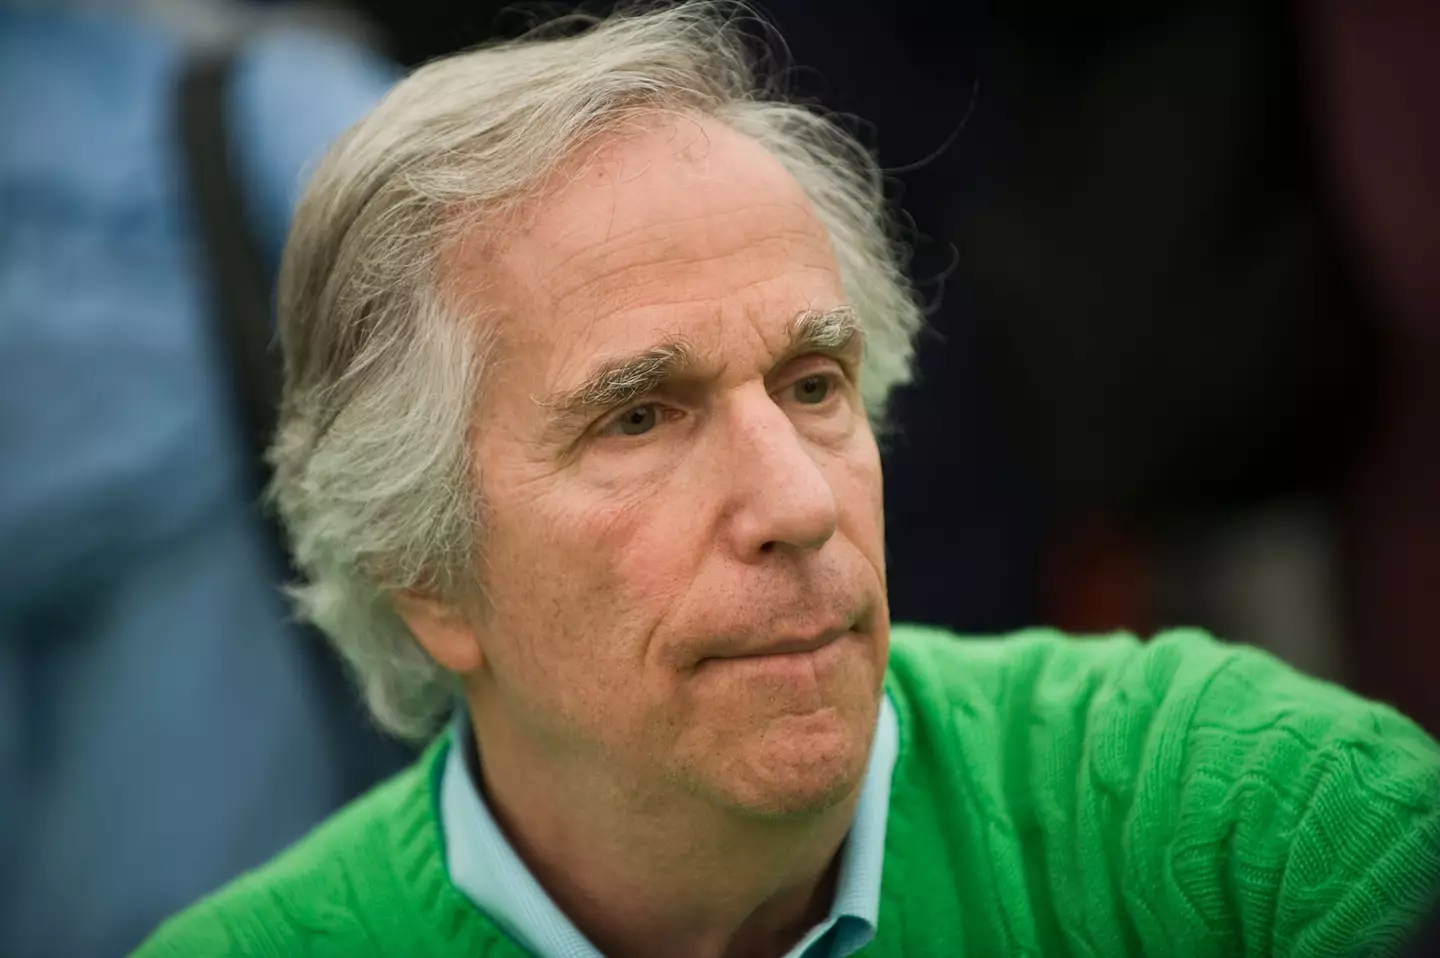 Henry Winkler played The Fonz in Happy Days.